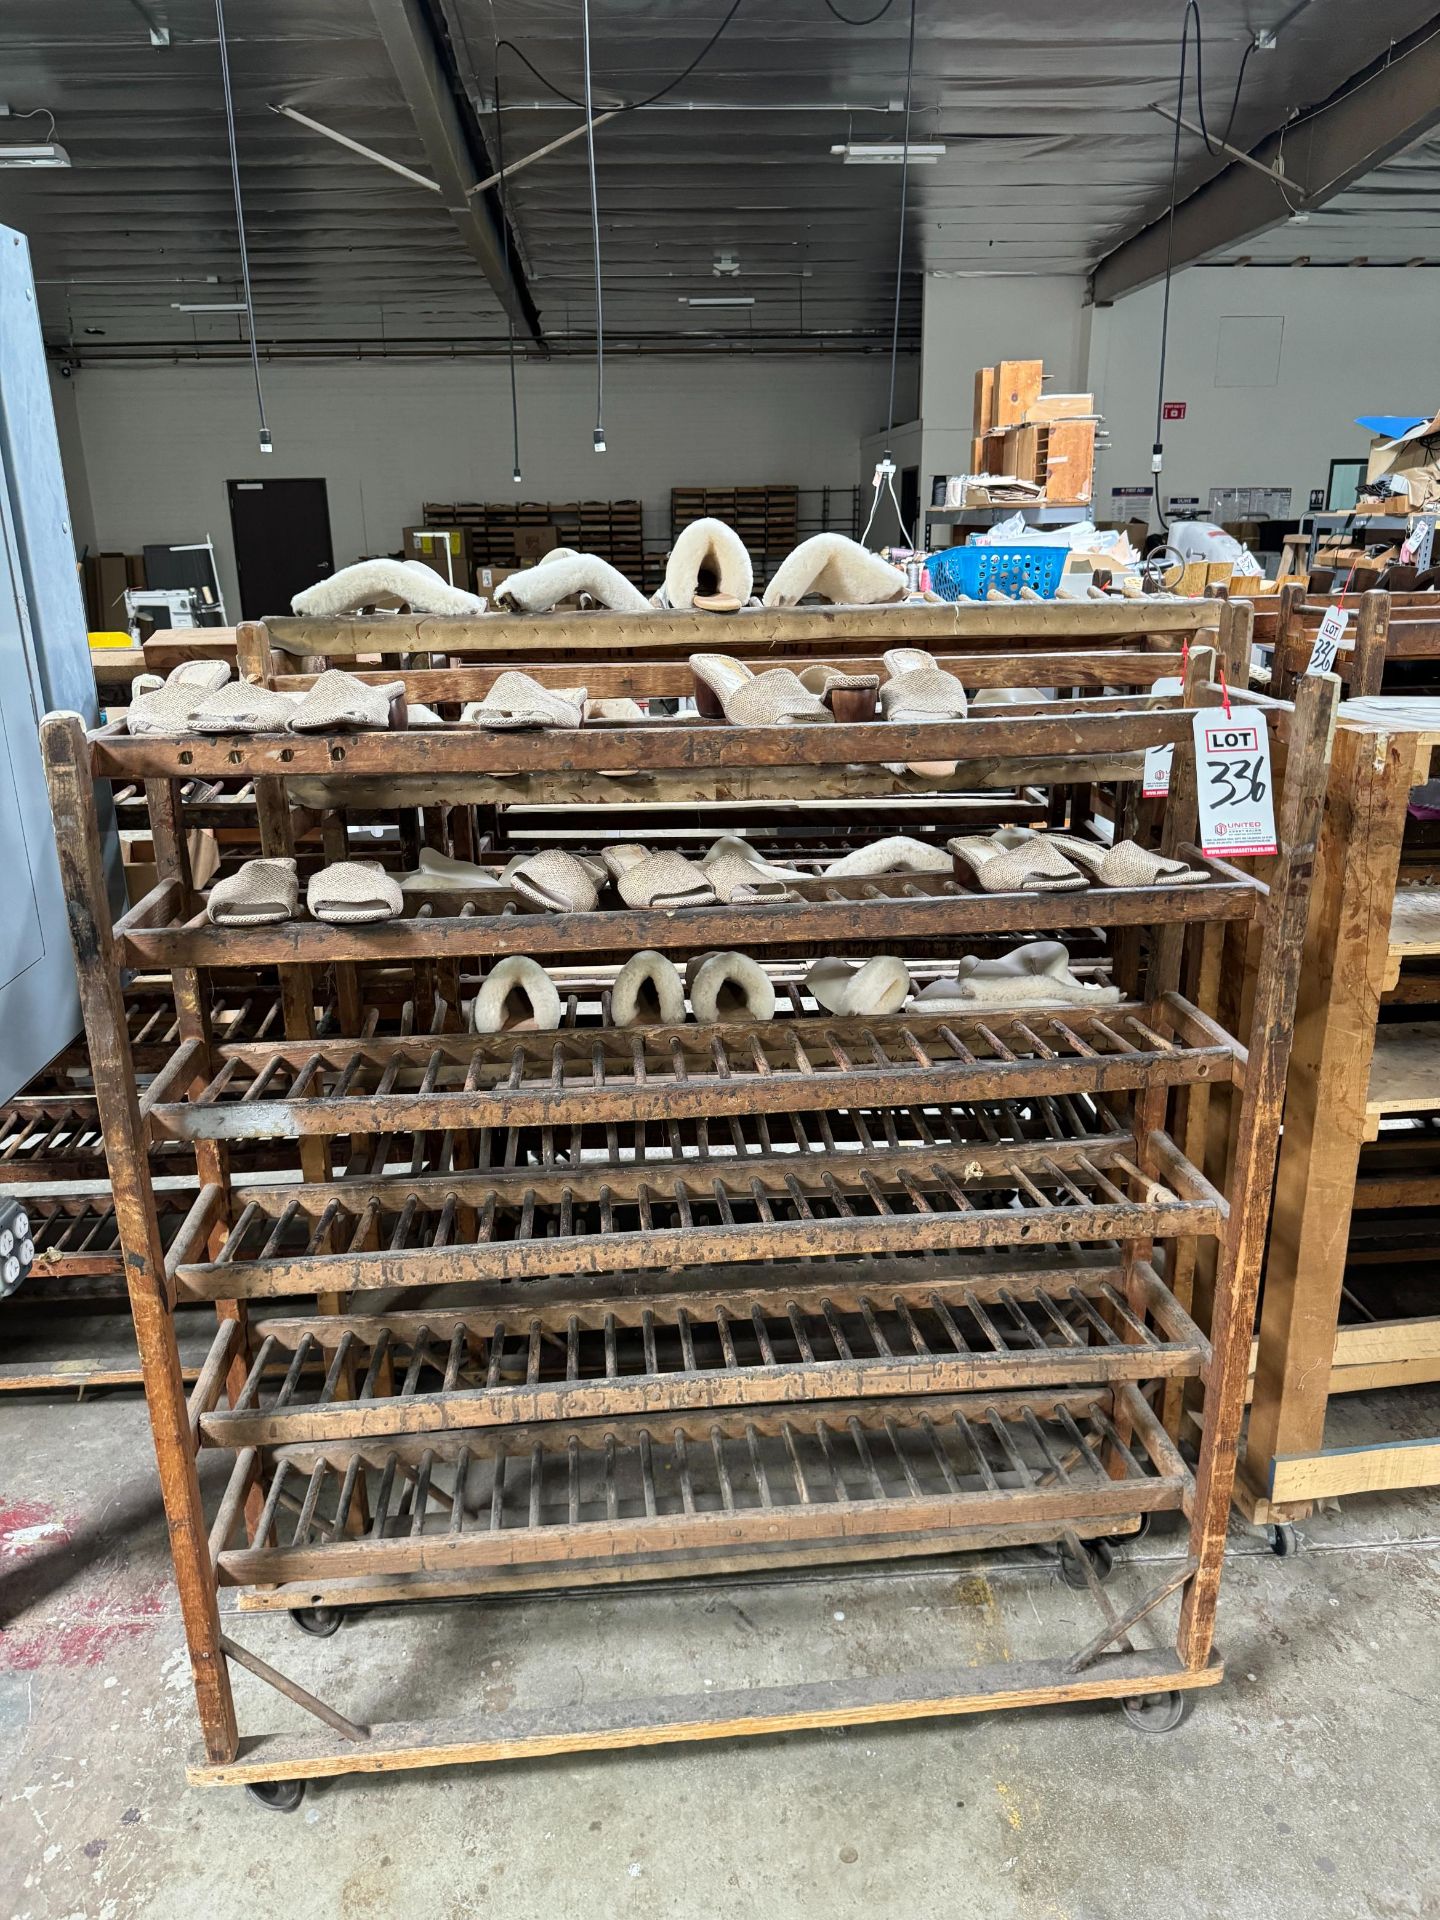 LOT - ROLLING SHOE RACKS, CONTENTS NOT INCLUDED - Image 6 of 7